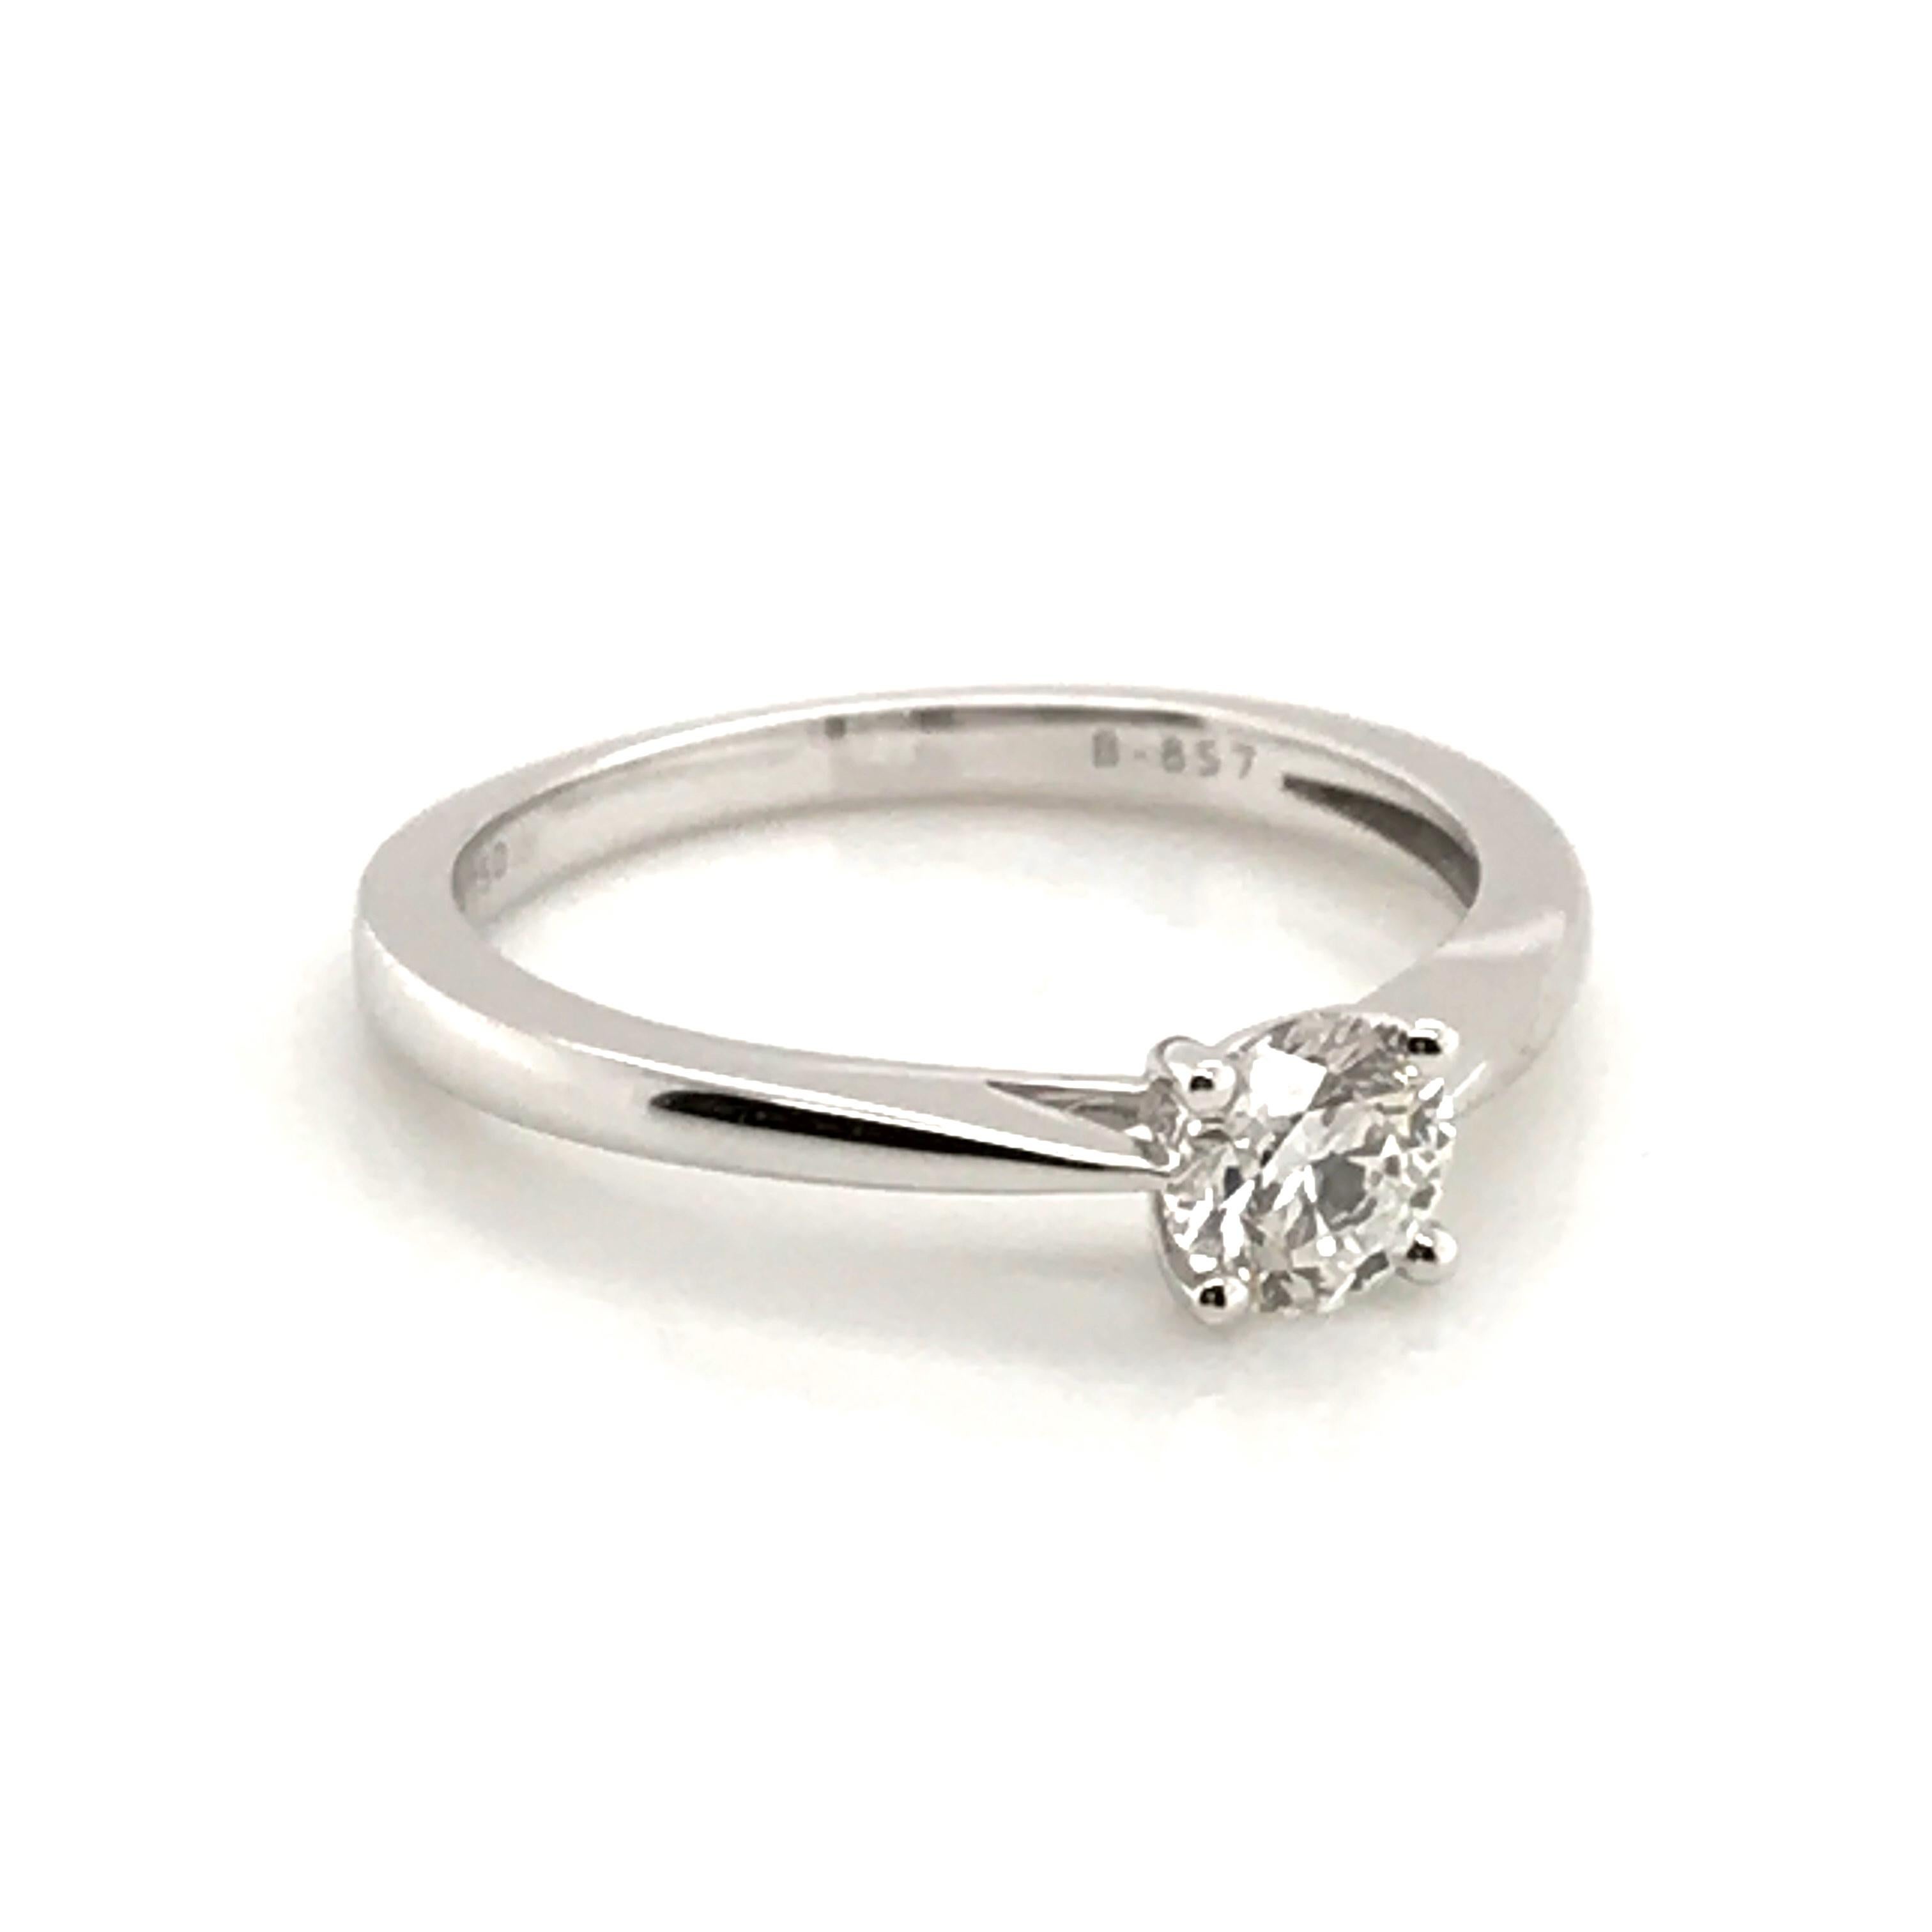 Solitaire Ring White Diamond Certified Color F White Gold 18 Karat For Sale 10